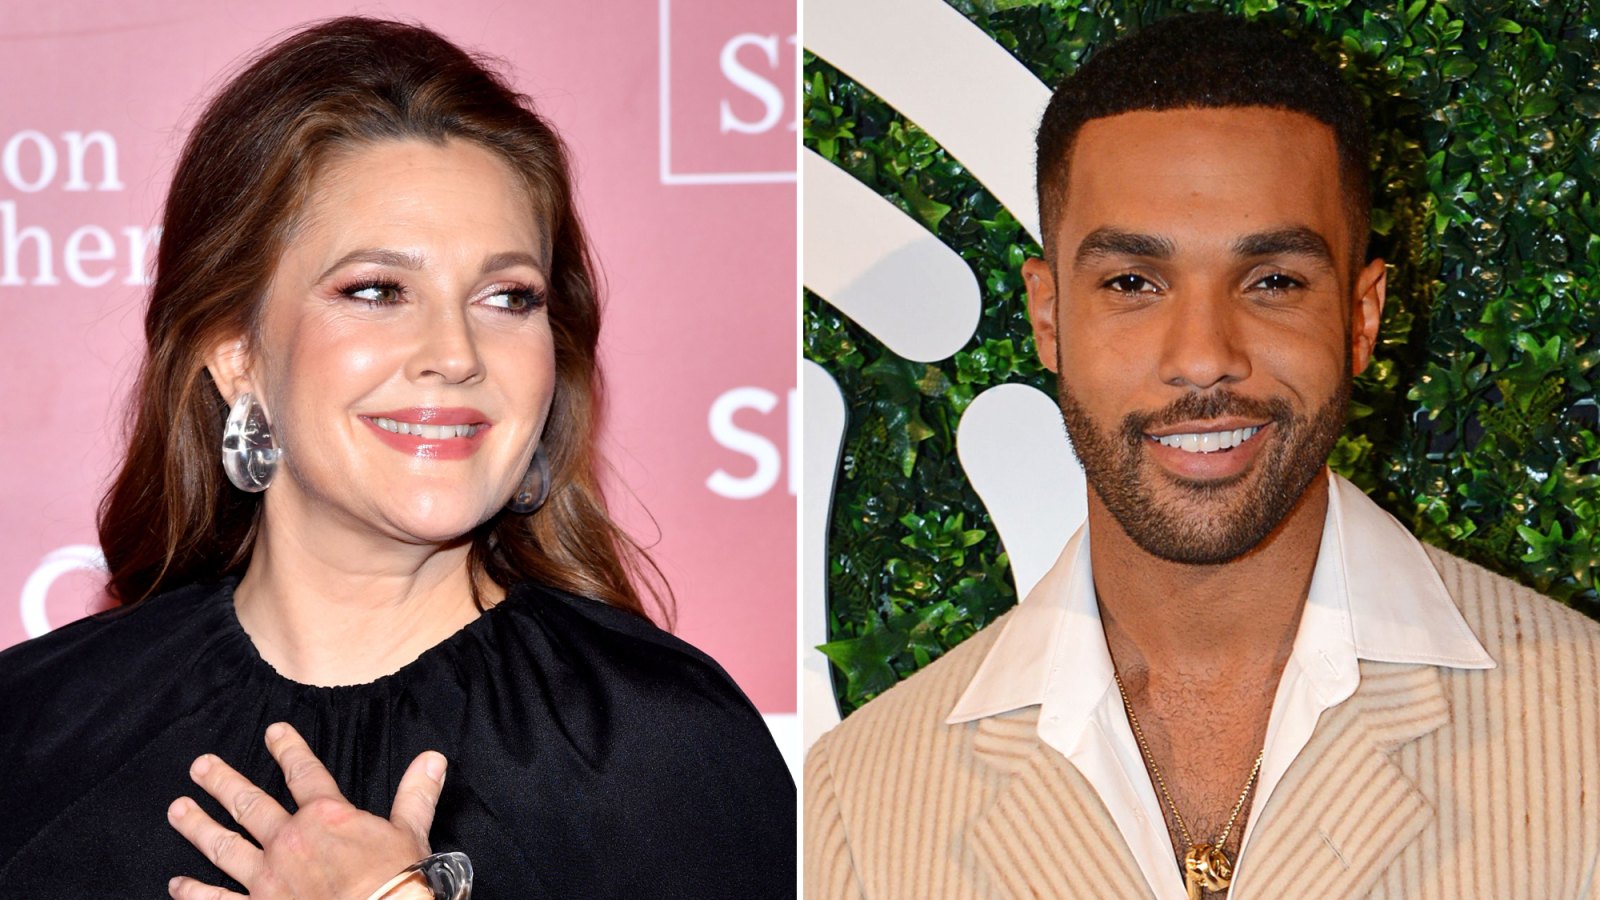 Drew Barrymore Gets Flustered by Emily In Paris’ Lucien Laviscount Flirty Remarks: ‘I’ll Be Your Darth Vader Any Day’